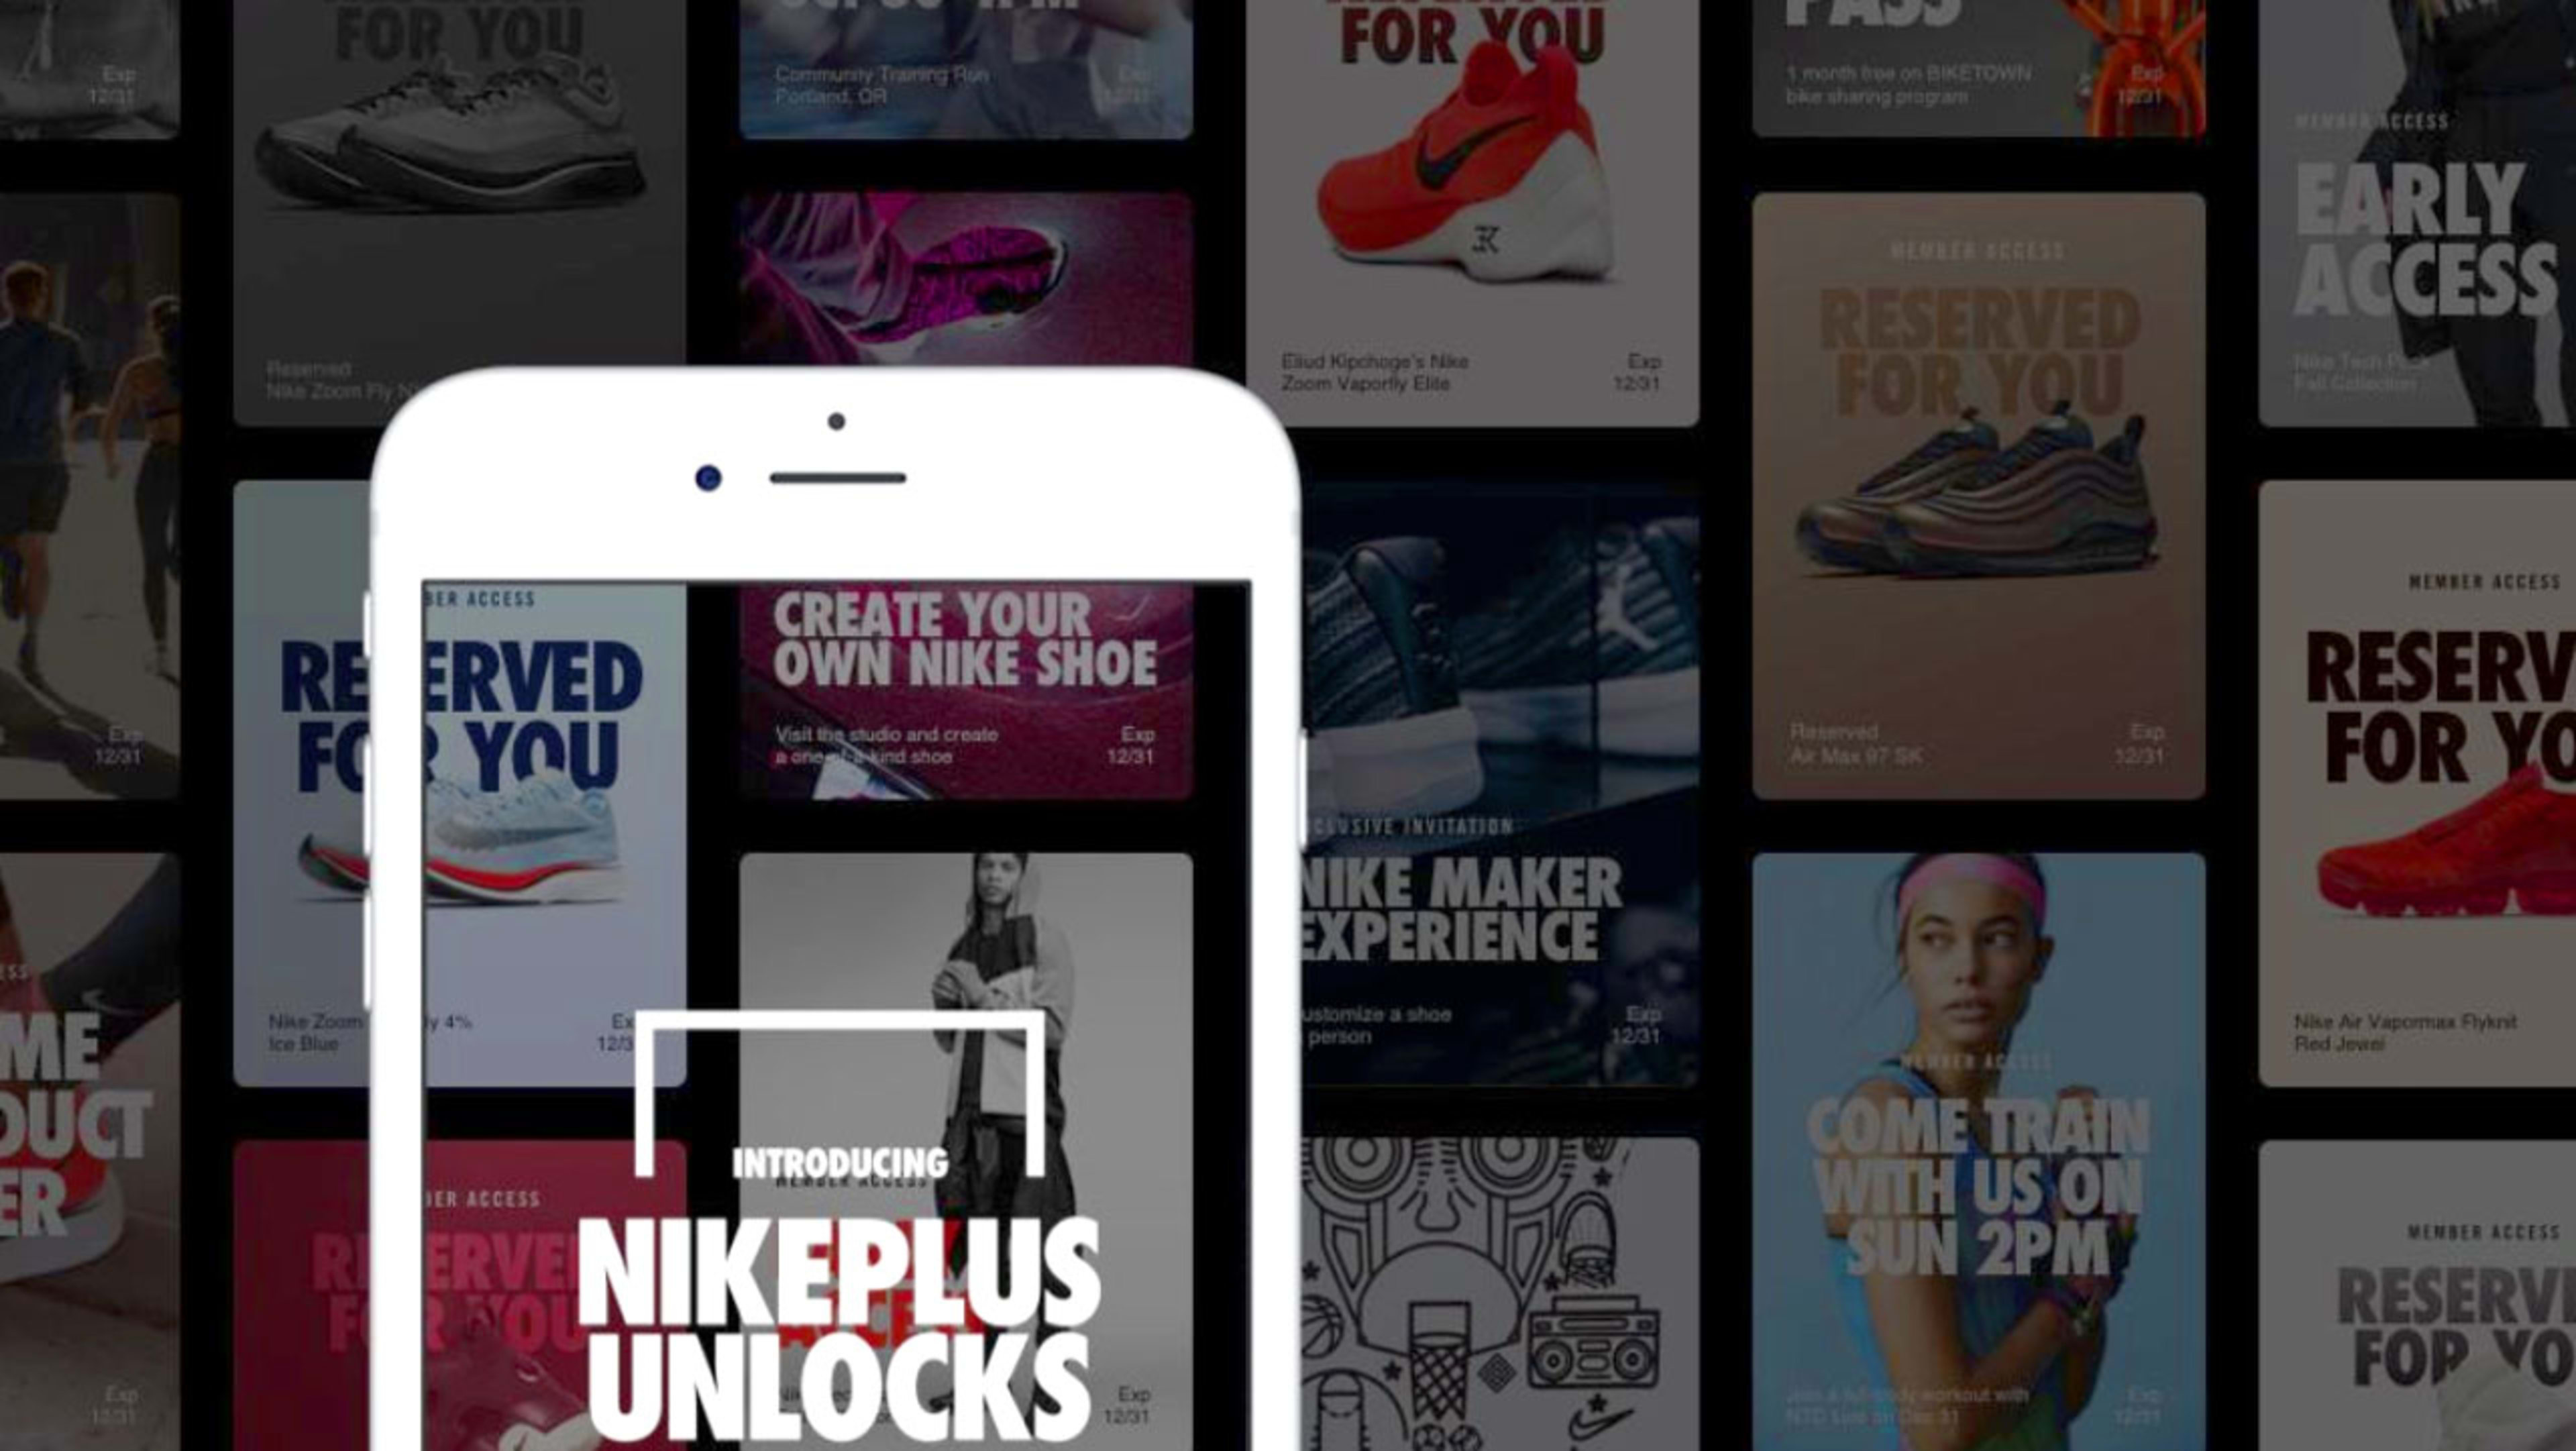 Nike’s app is doling out Apple Music and other perks for staying active